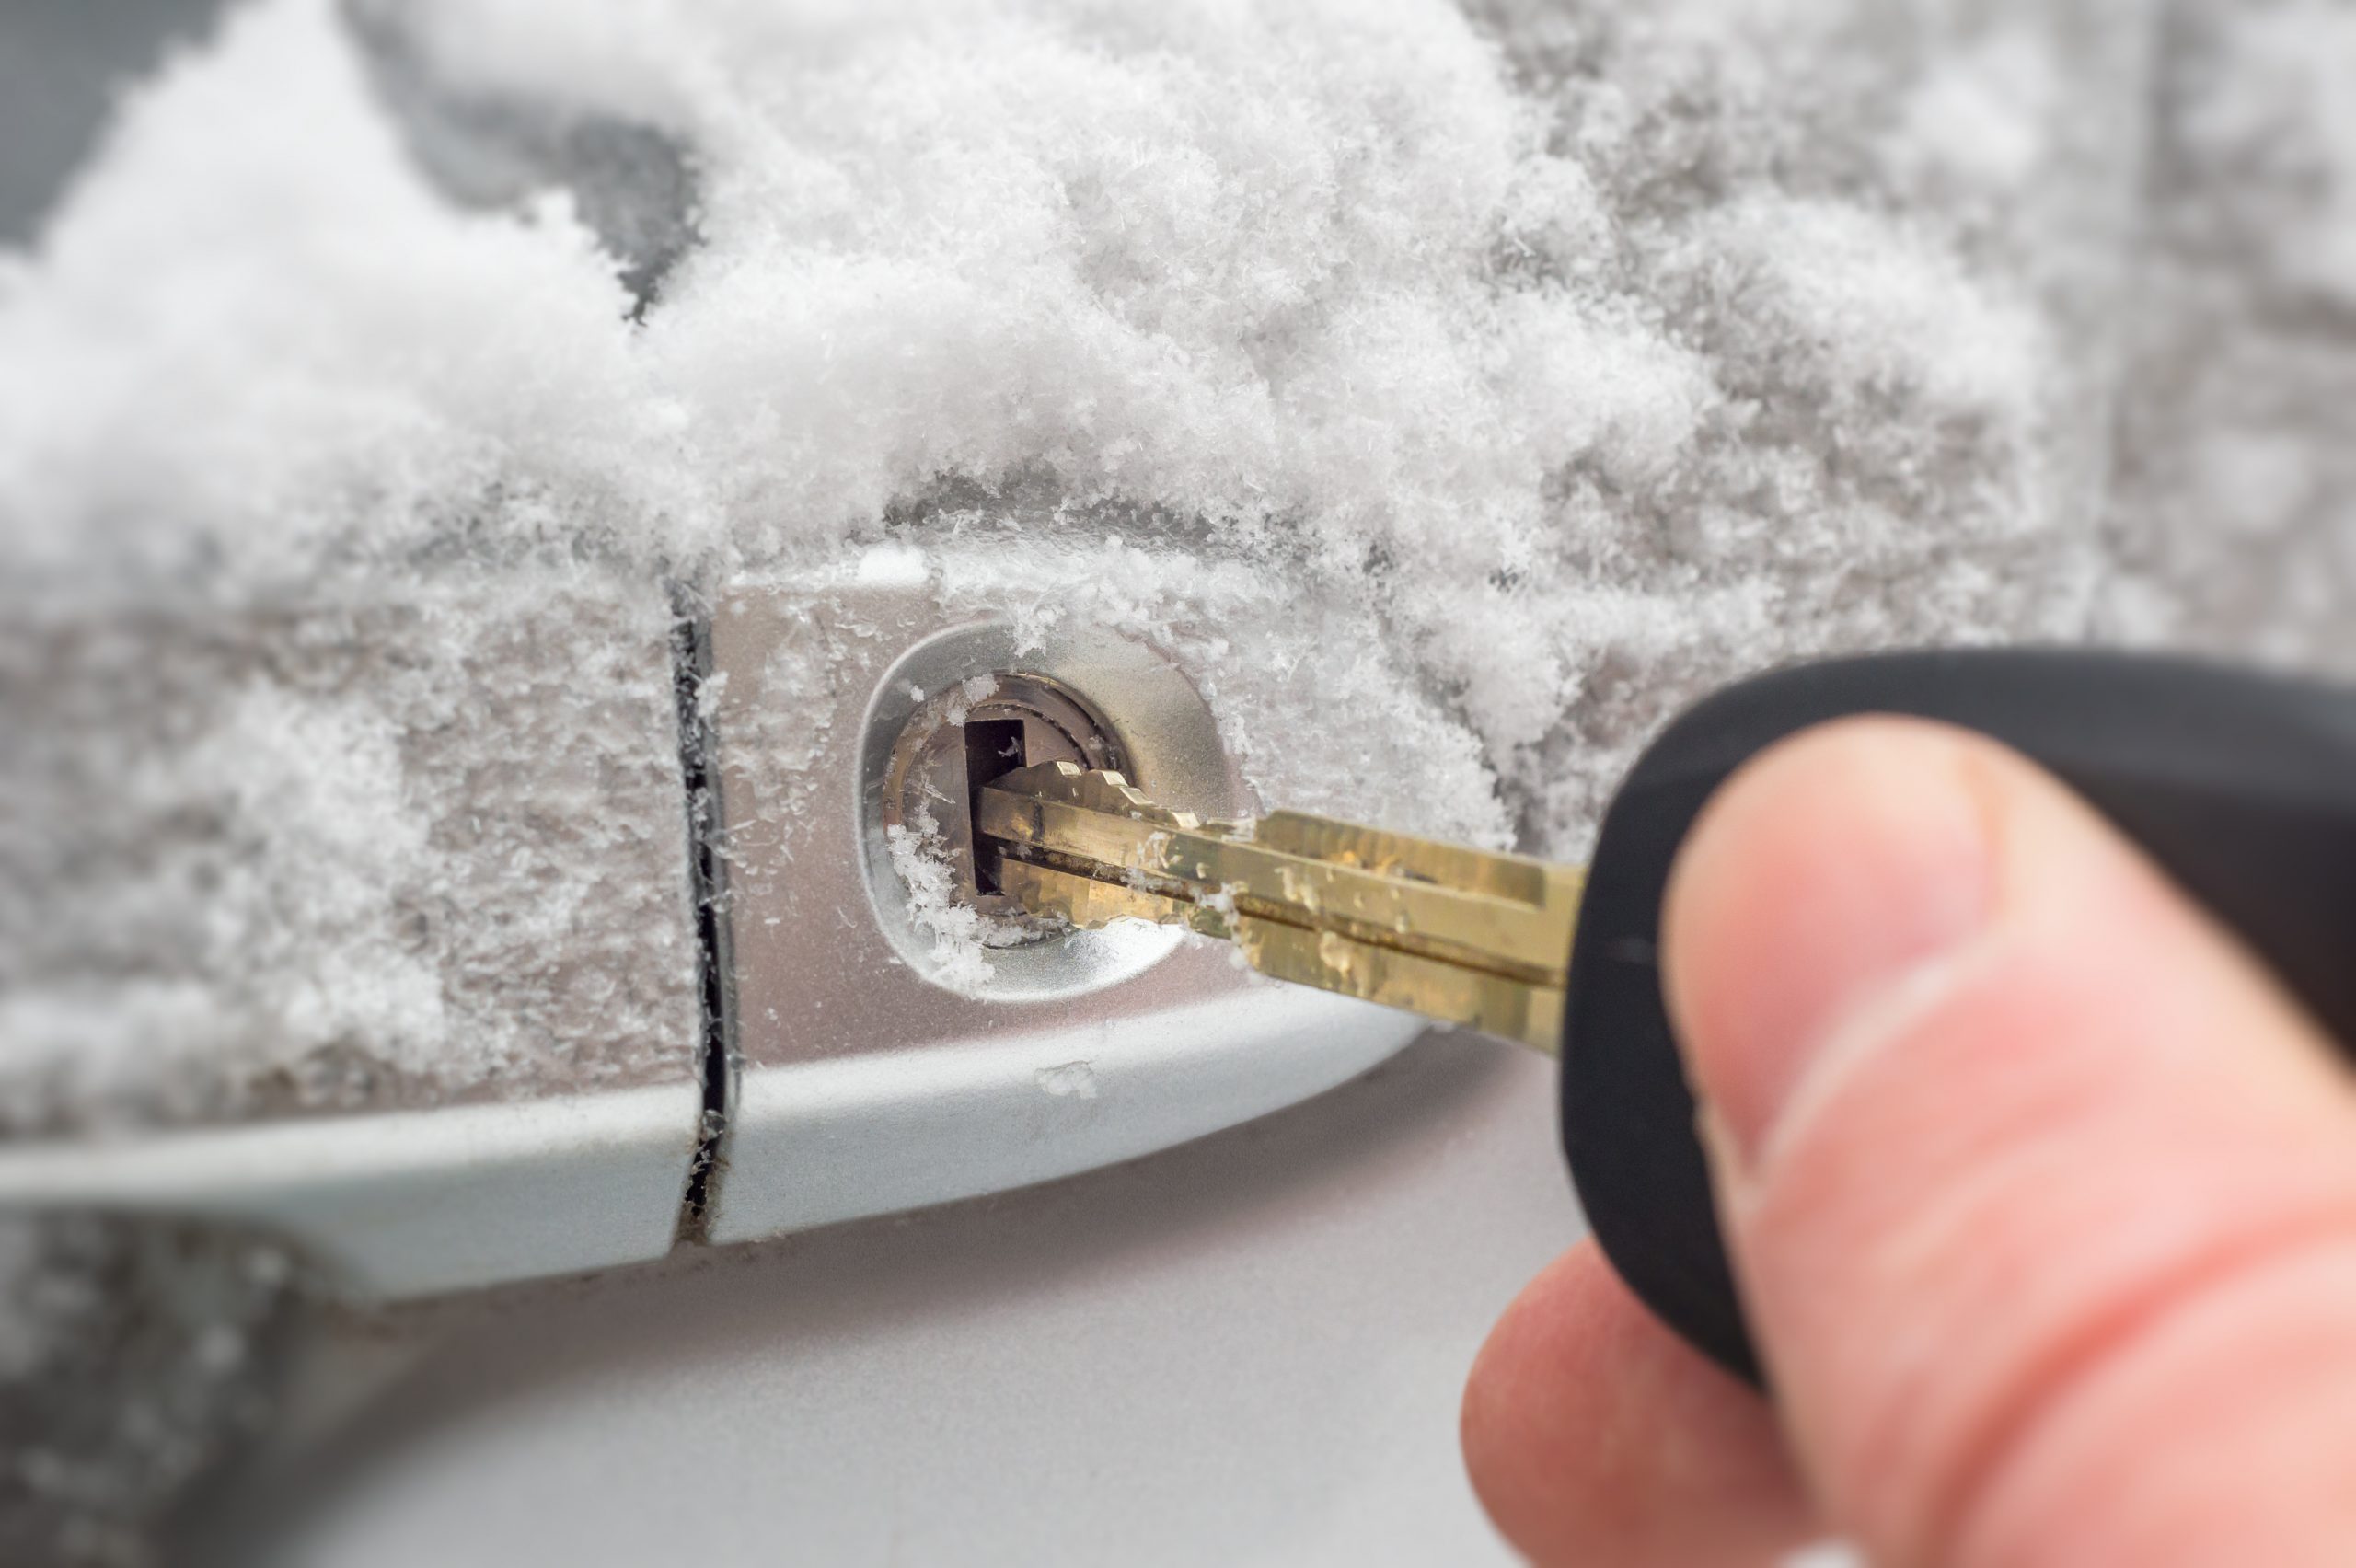 fix a frozen keylock on your car with hand sanitizer, handy auto hacks